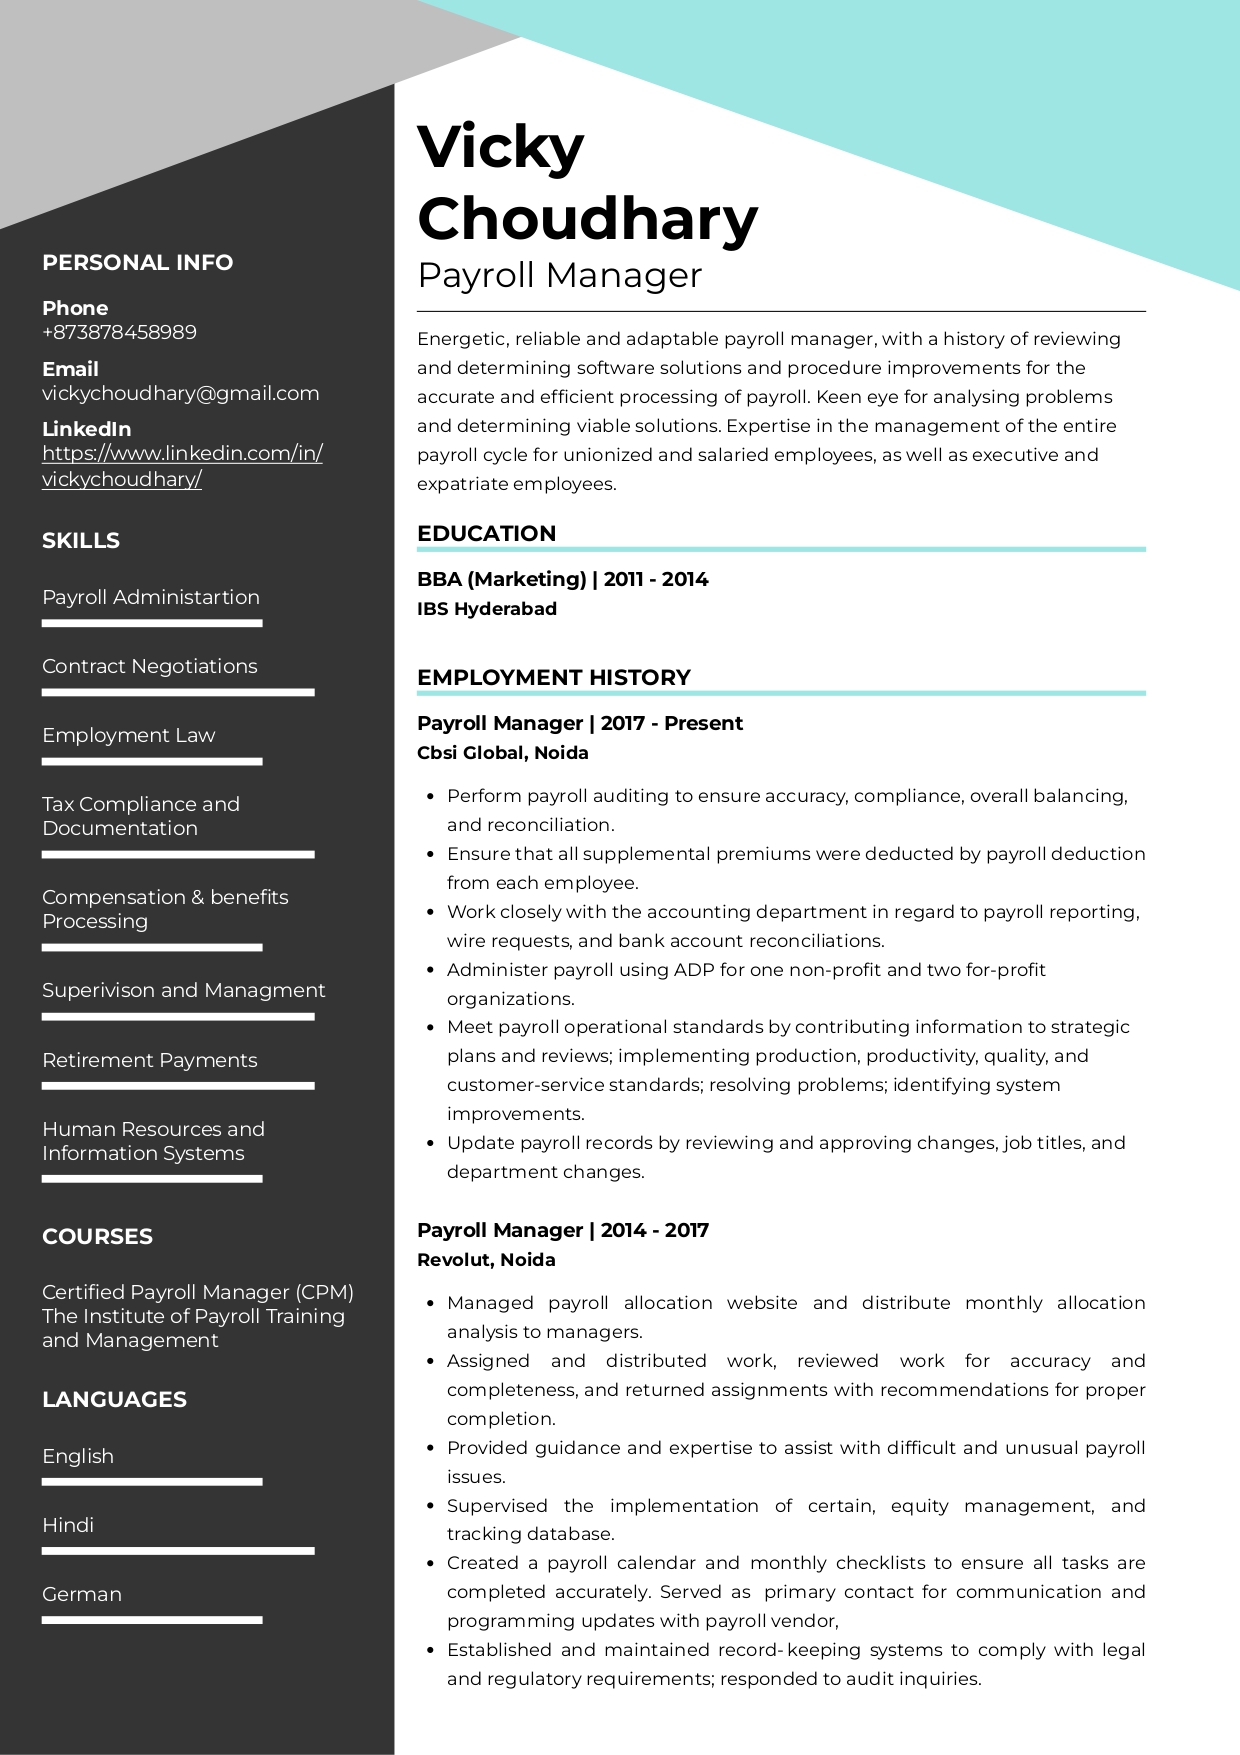 Sample Resume of Payroll Manager | Free Resume Templates & Samples on Resumod.co